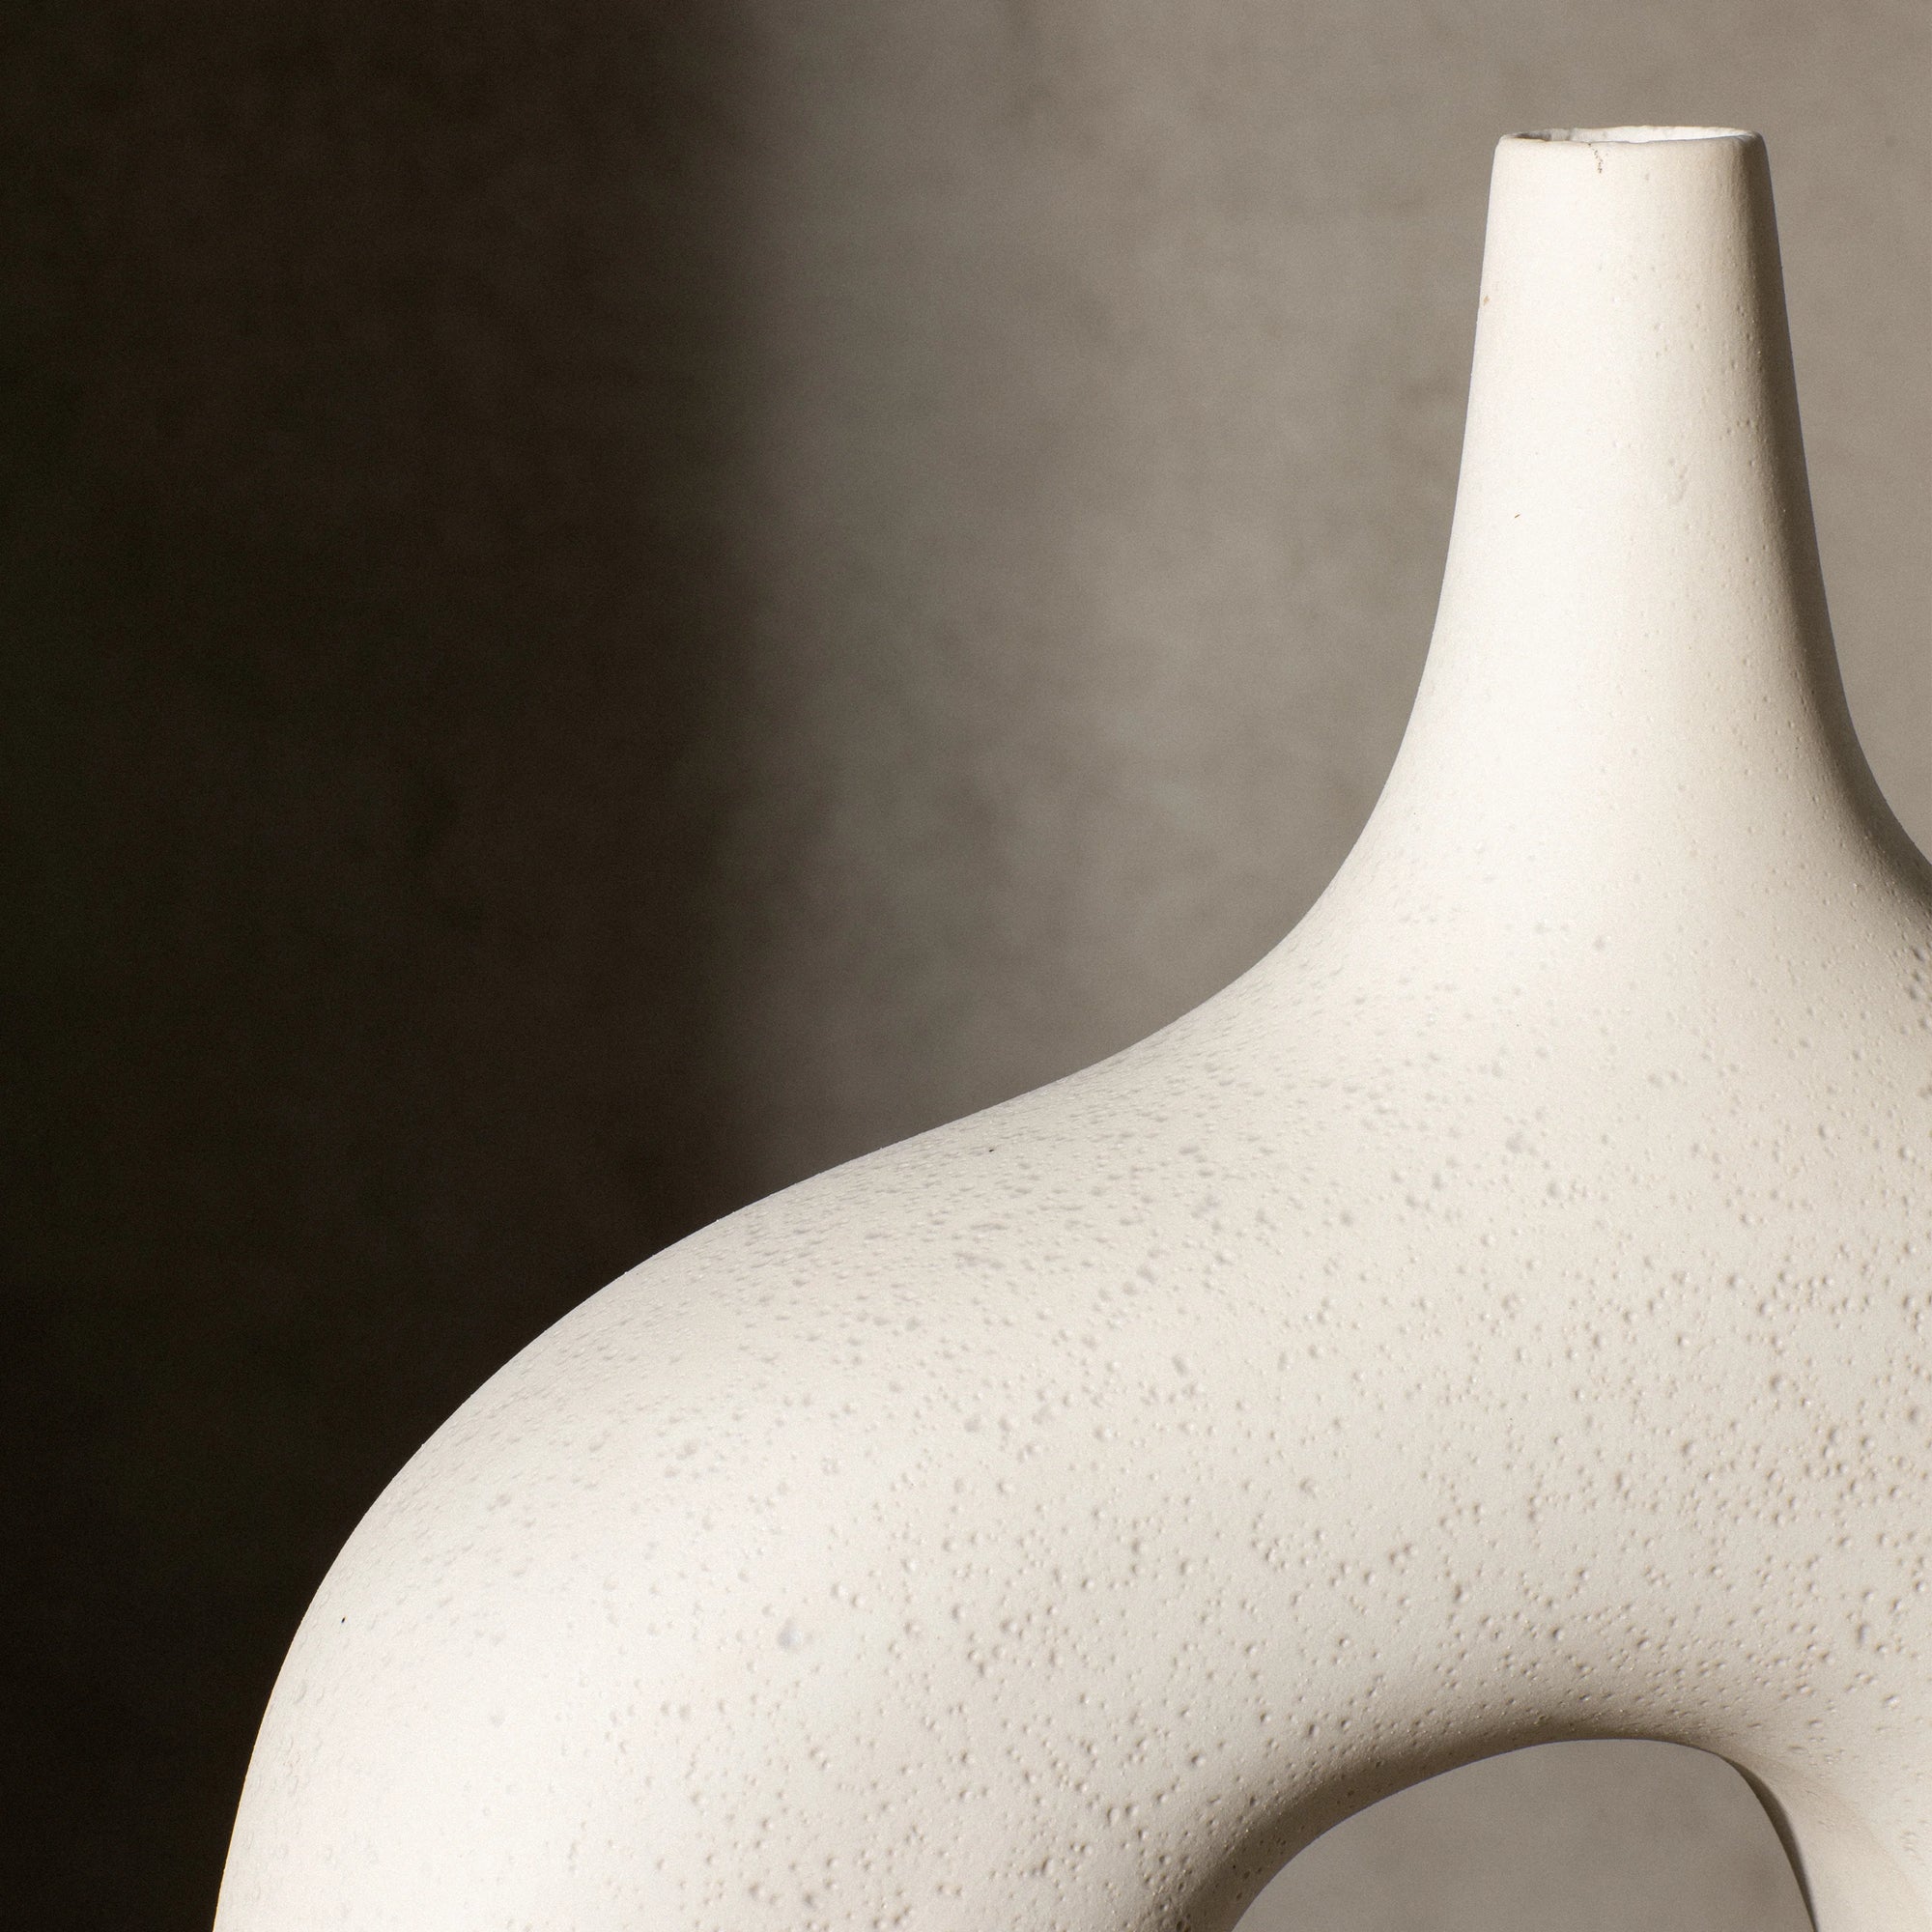 Reminiscent of the 1960's lava glaze ceramics, the Stretch Vases in cream are slip cast vessels that nest/straddle each other.